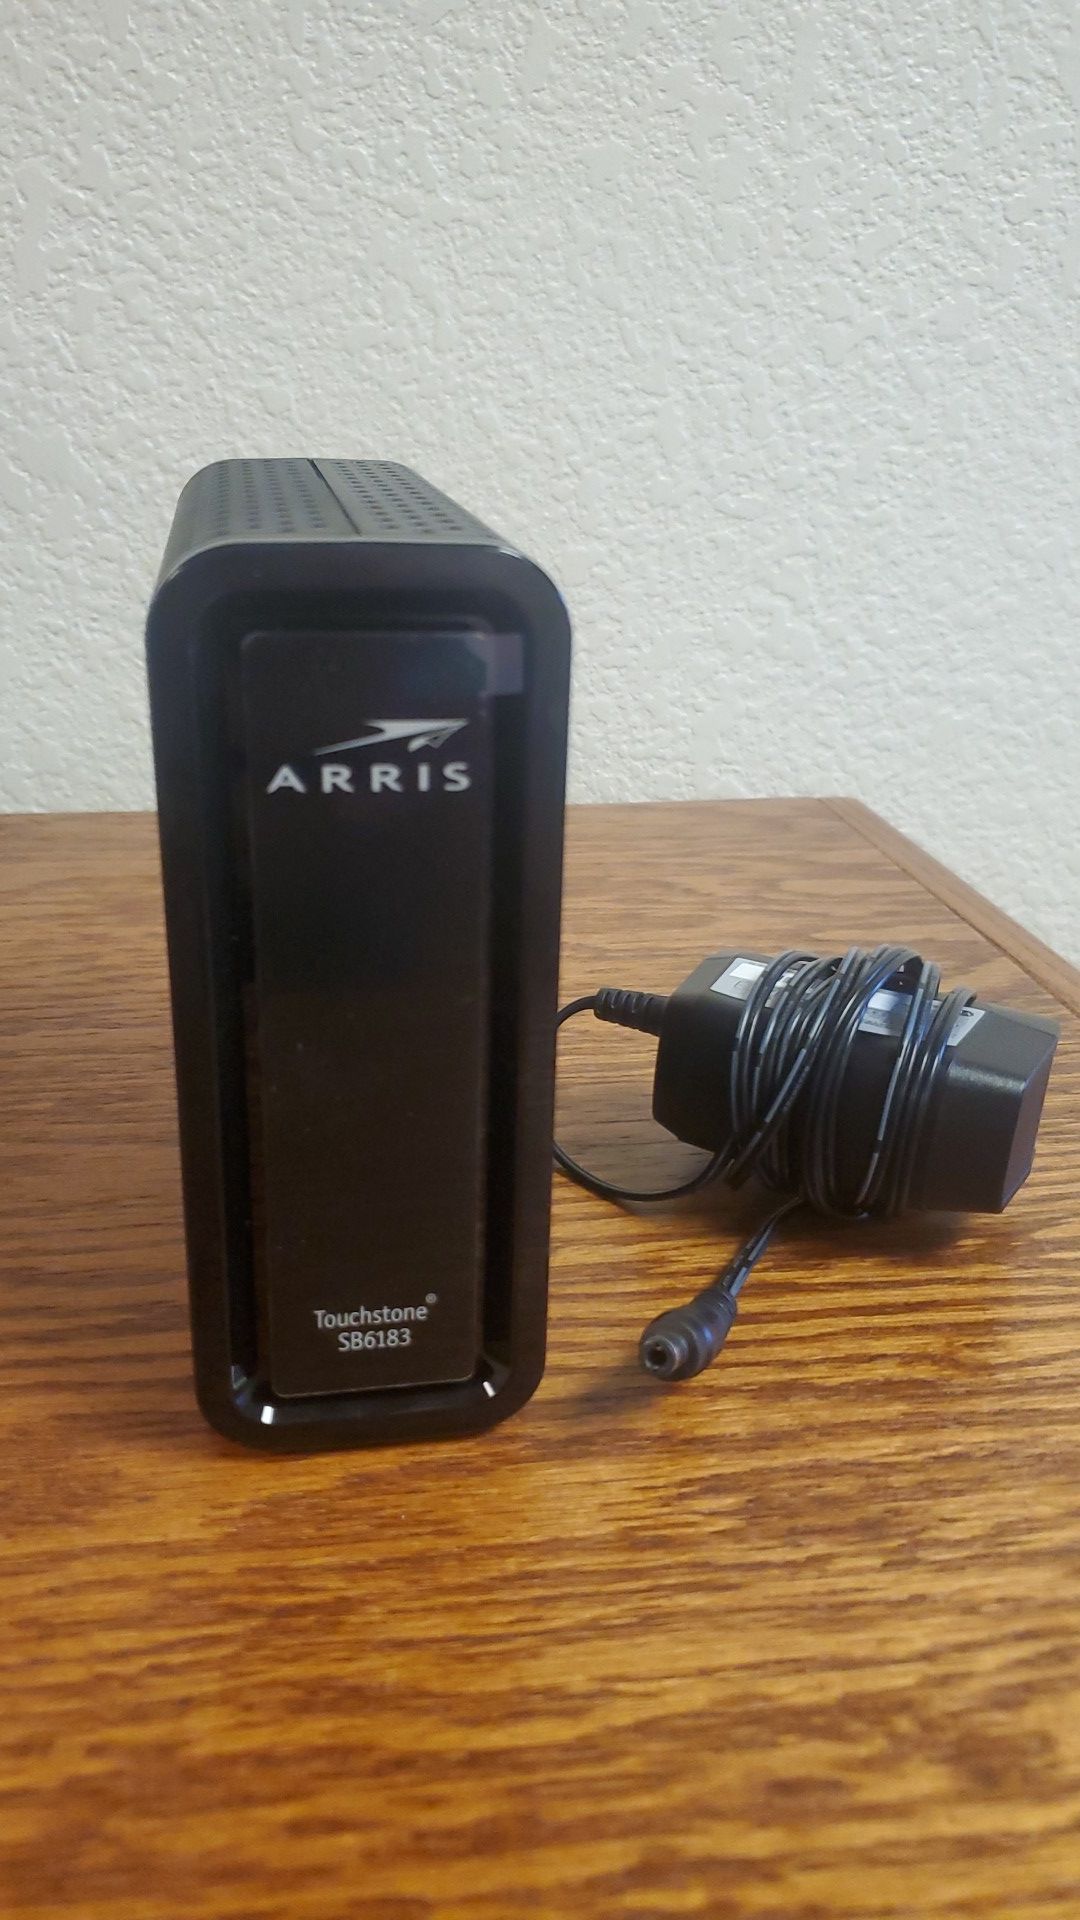 Arris Touchstone SB6183 High Speed Cable Modem